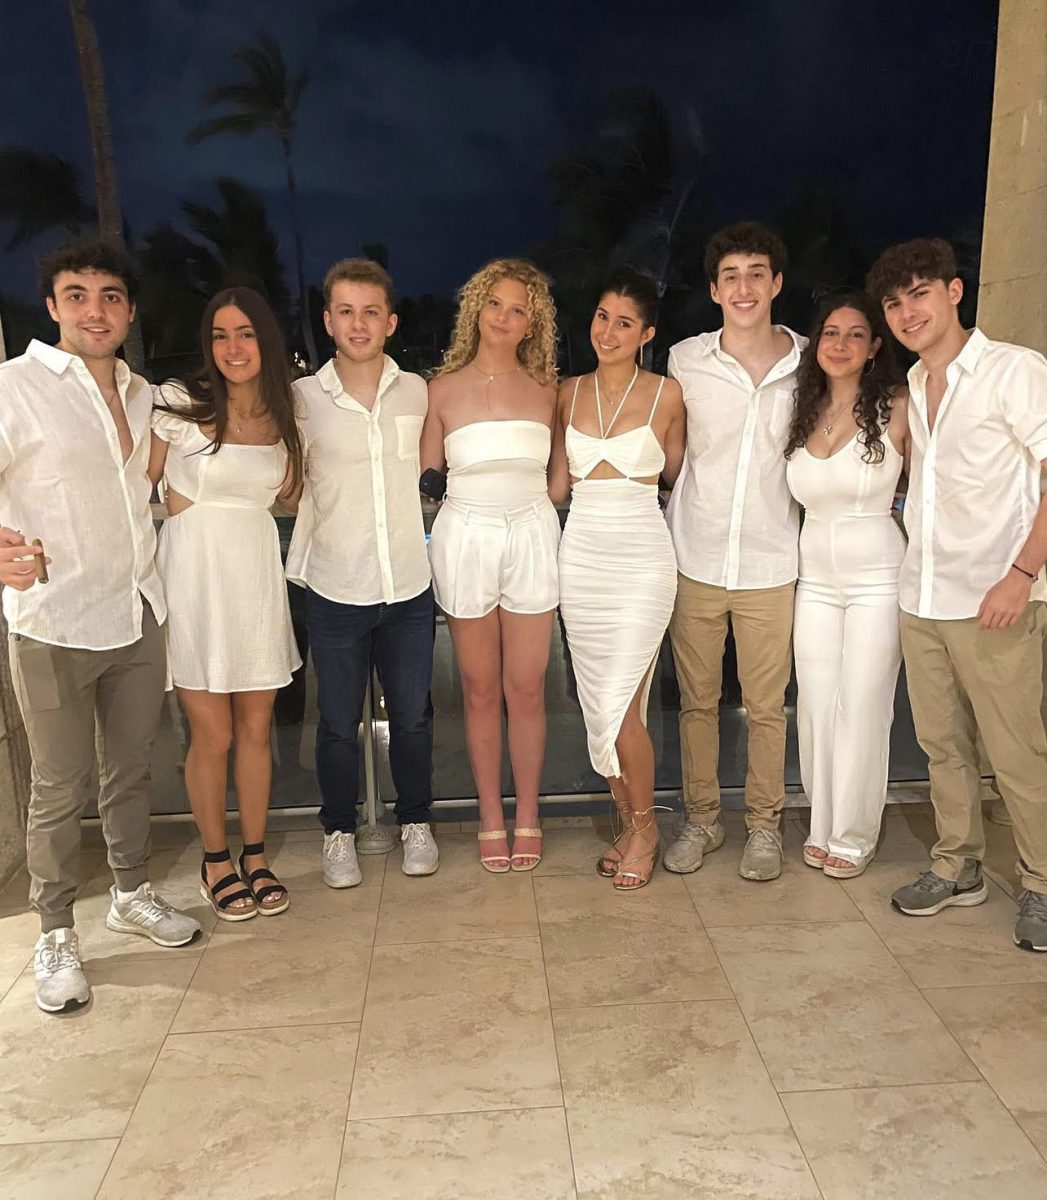 The+Class+of+2023+wears+white+to+an+event+on+their+senior+spring+break+trip+to+Punta+Cana.